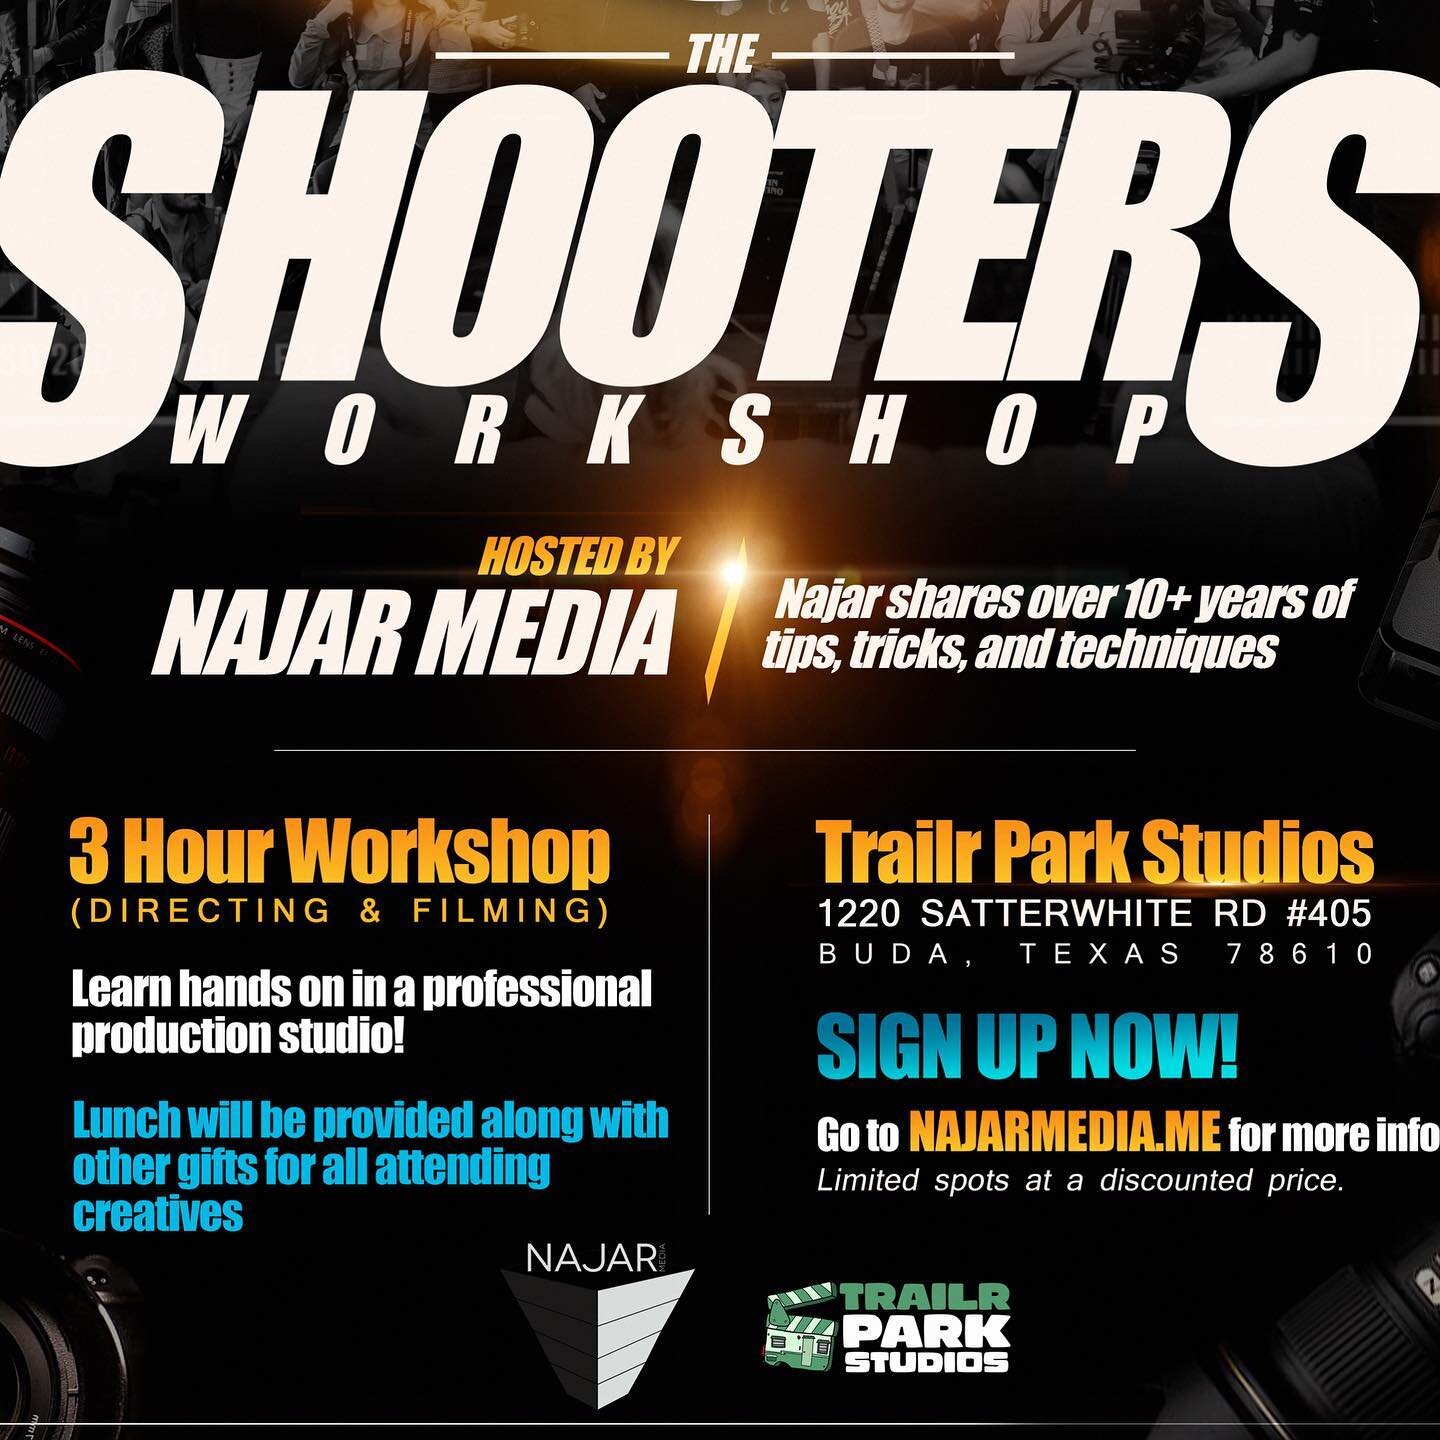 APRIL 30th!!! 👀🎬📸🎥

Join @najarmedia this Sunday for our first Workshop in Studio! 

Learn how to direct and film from @najarmedia who has been in the industry for 10+ years. 

Special Gift from @trailrparkstudios for everyone in attendance! 👀